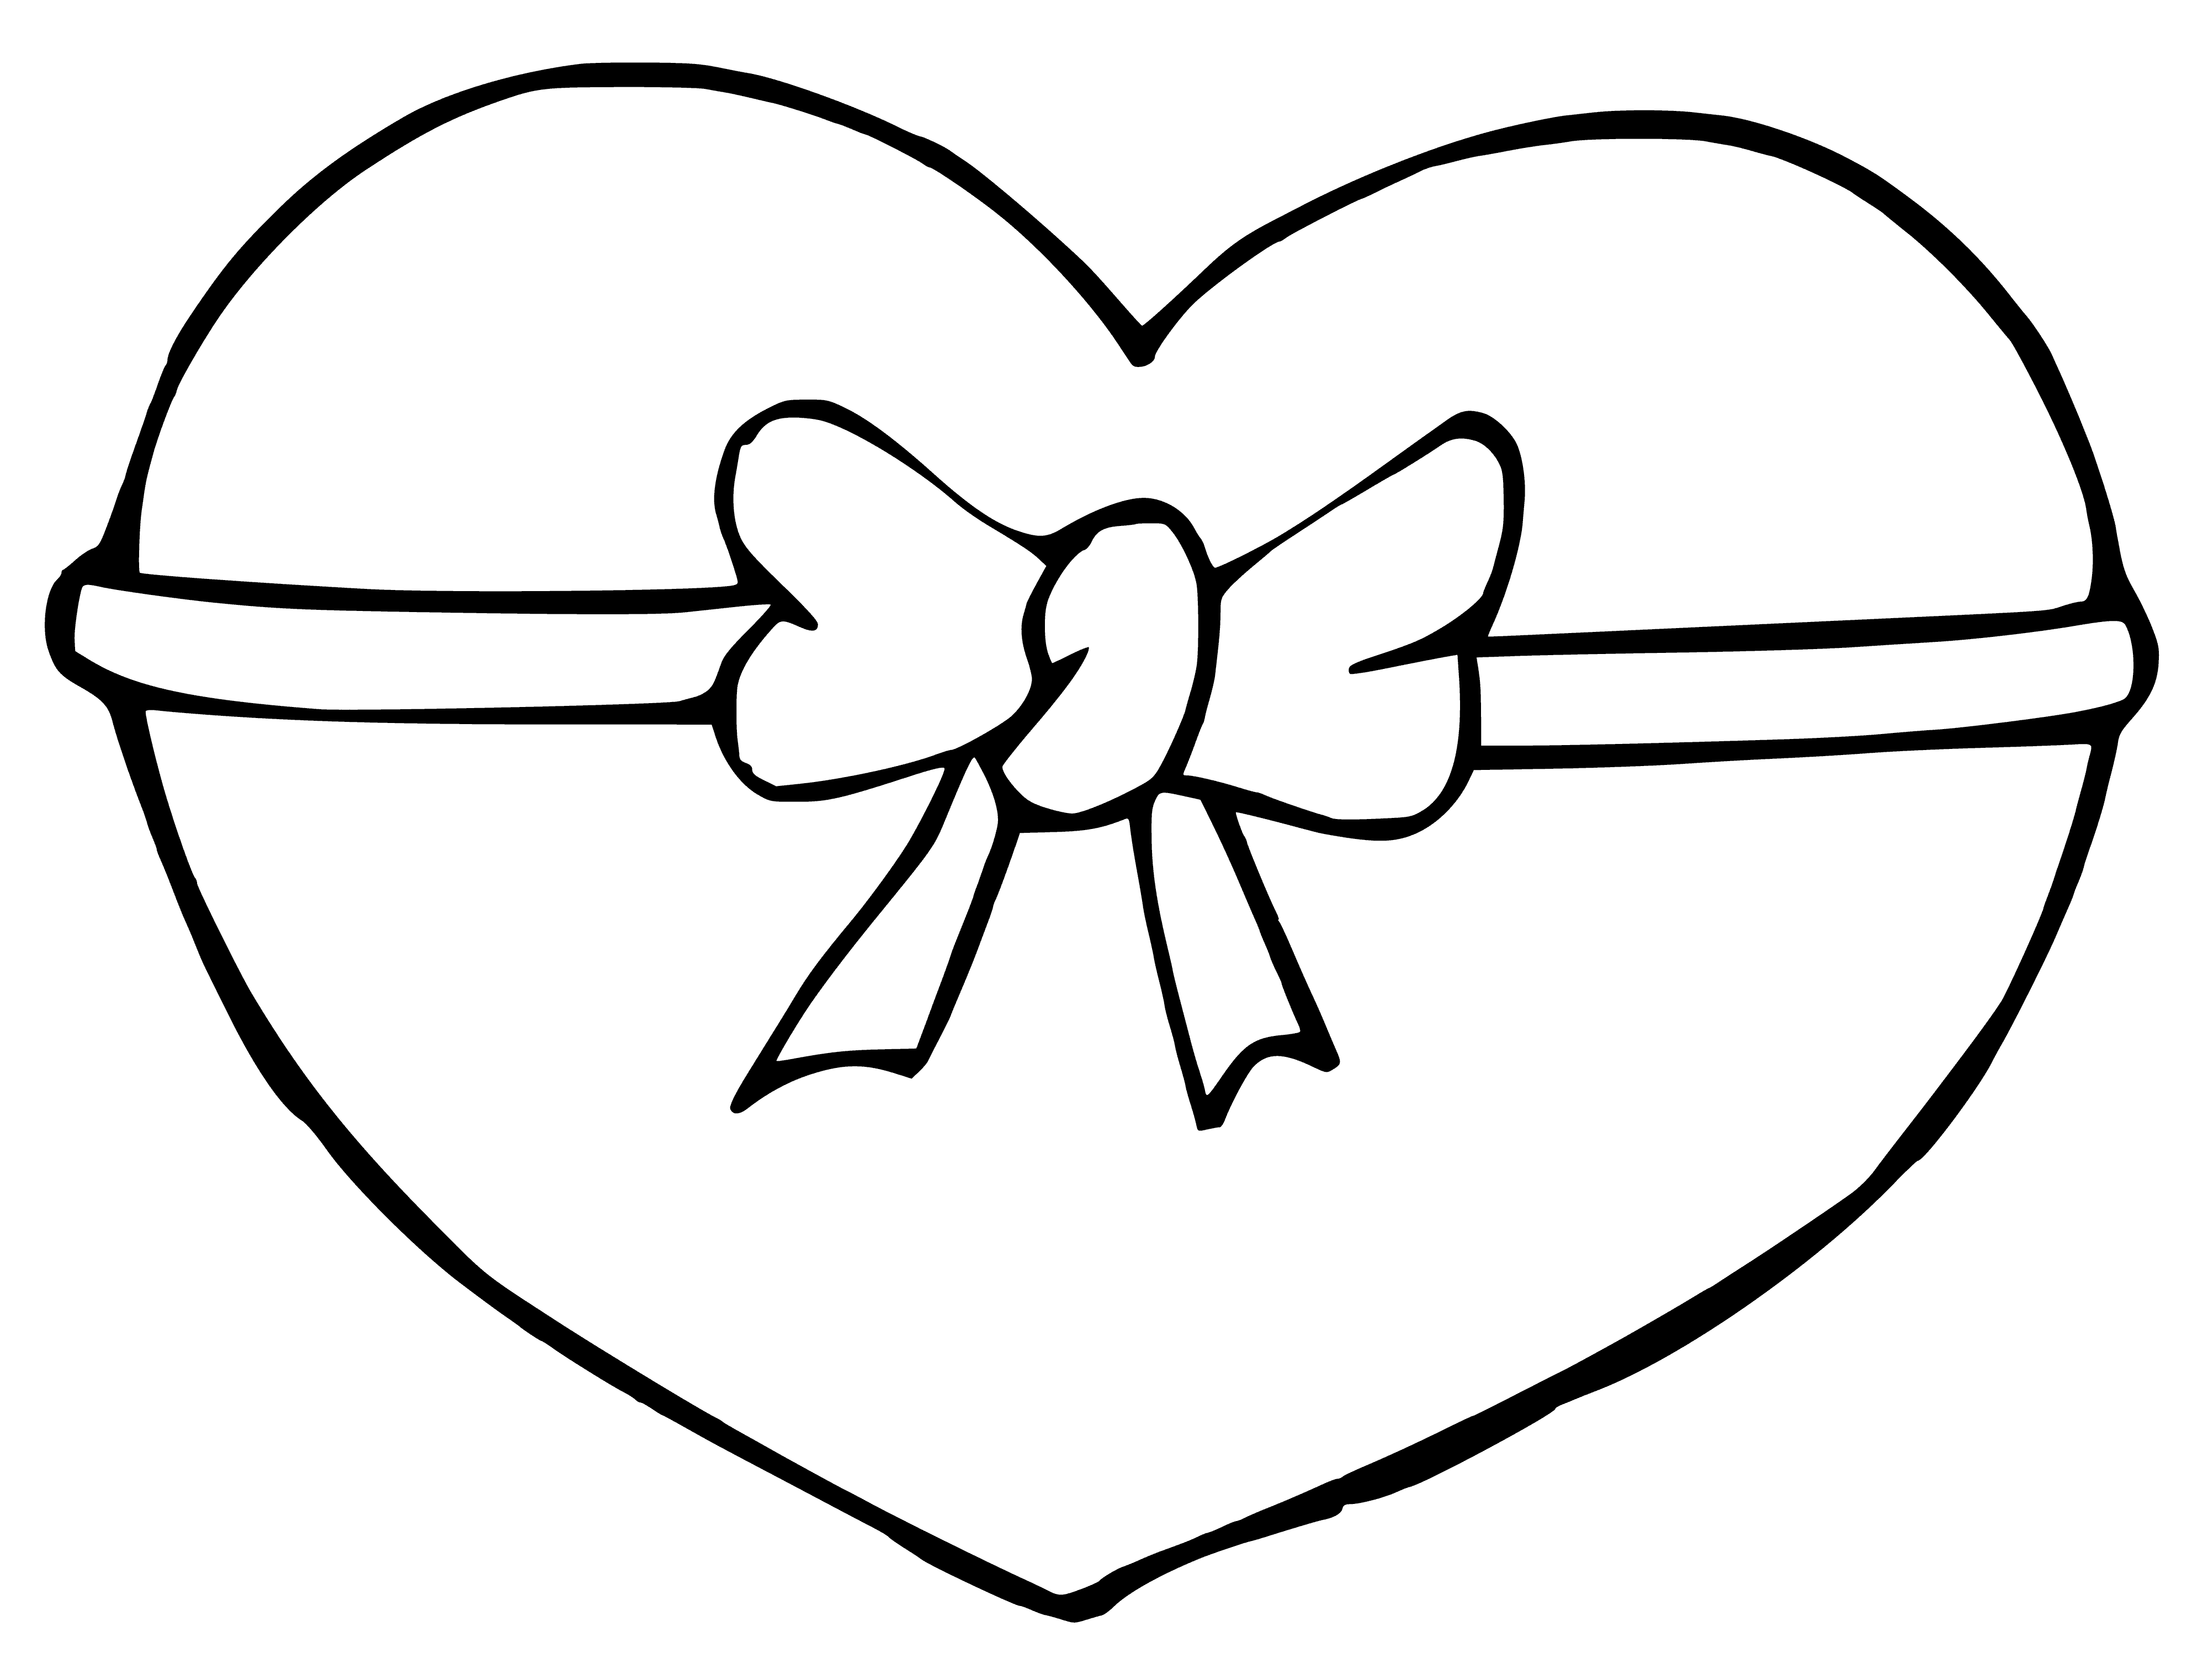 Heart with bow coloring page